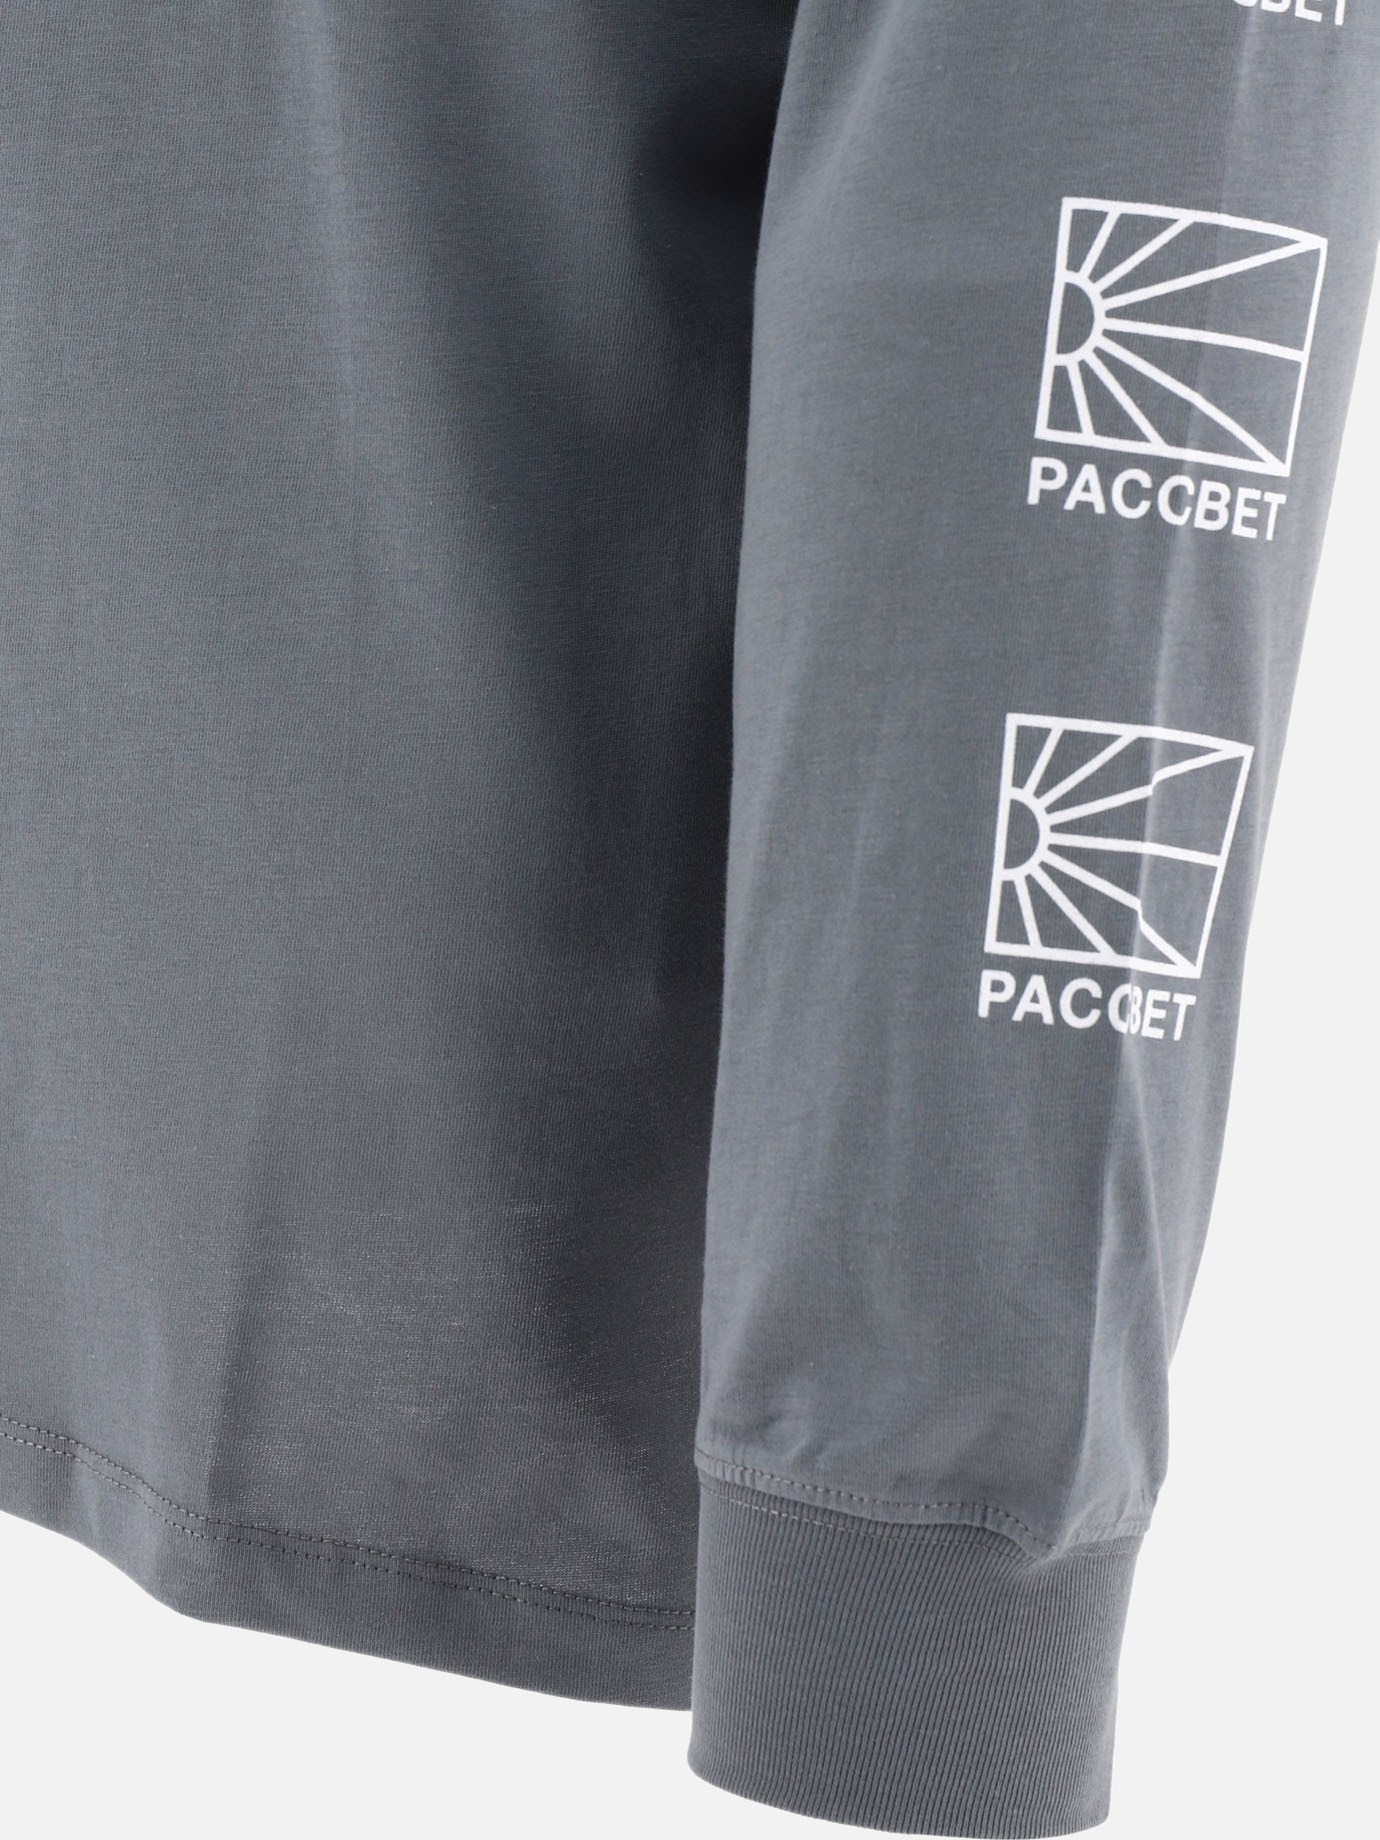 T-shirt  Small Logo  by Paccbet